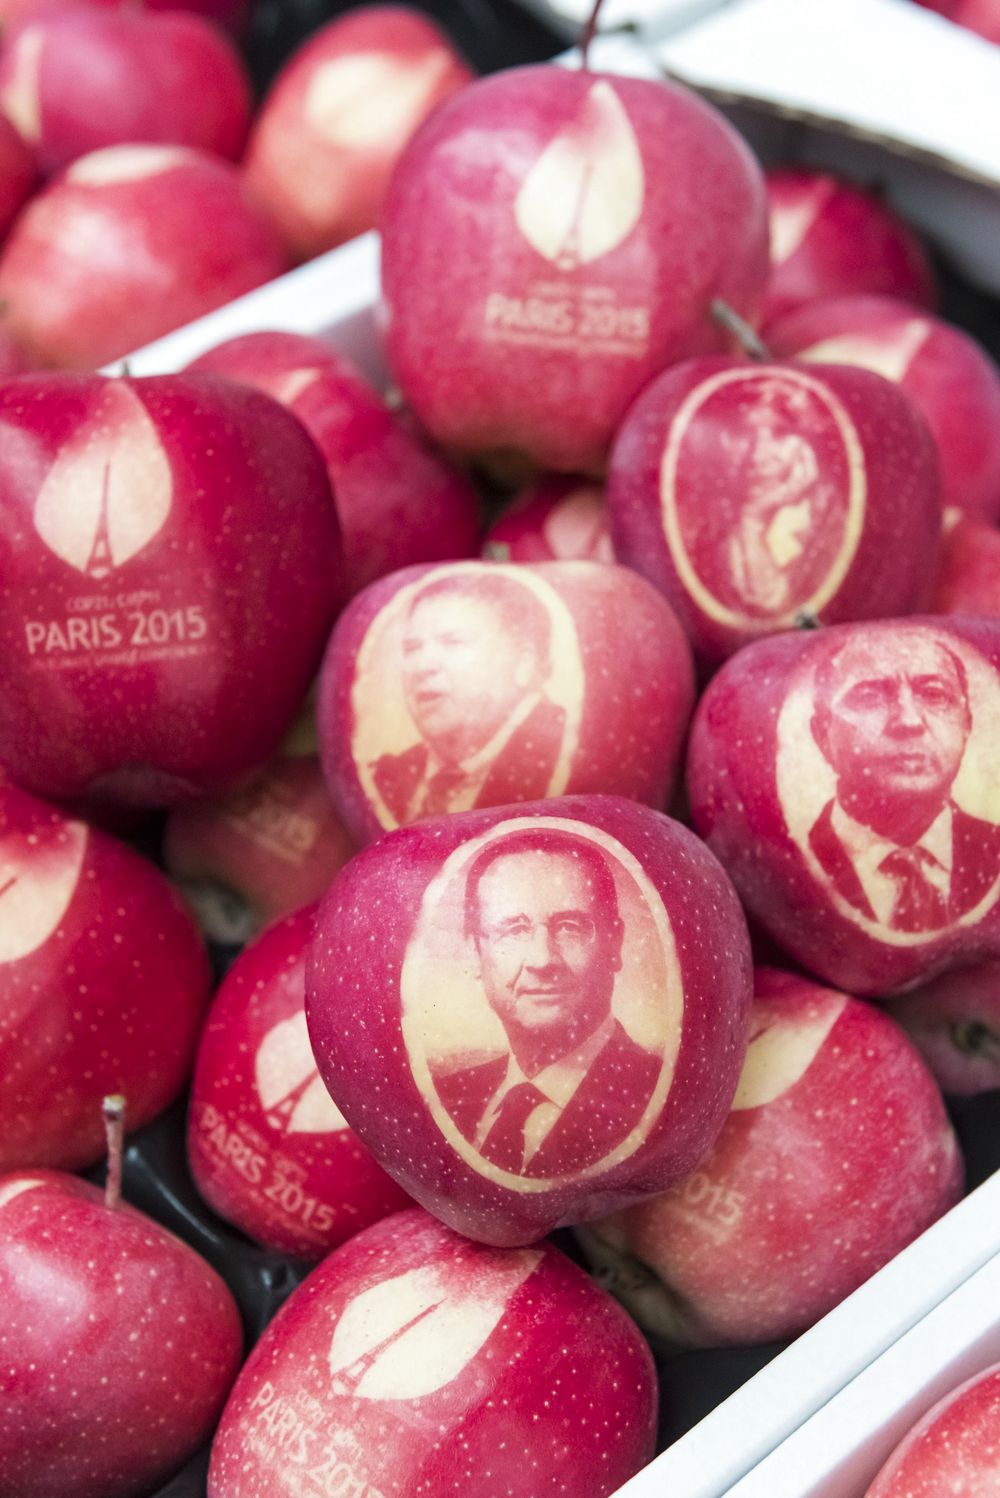 A picture taken on November 4, 2015 shows an apple marked with the portraits of French President Francois Hollande (C), French Foreign Minister Laurent Fabius (R), UNFCCC Climate Negotiations Daniel Reifsnyder (top C) and Founder of the Insitute for Sustainable Development and International Relations (IDDRI) Laurence Tubiana (top R) and apples marked with the logo of the COP21 climate conference at "Les Jardins Fruitiers de Laquenexy", a site of the "Conseil Departemental de Moselle", in Laquenexy, eastern France. The 200 "illustrated apples" with the logo of the COP21 are gifts for the 196 state guests who will attend the COP21 in Paris in December. A sticker was applied onto the skin of the fruits, the masked area was then protected from the sun while the rest of the apple continued to grow naturally. AFP PHOTO / JEAN-CHRISTOPHE VERHAEGEN